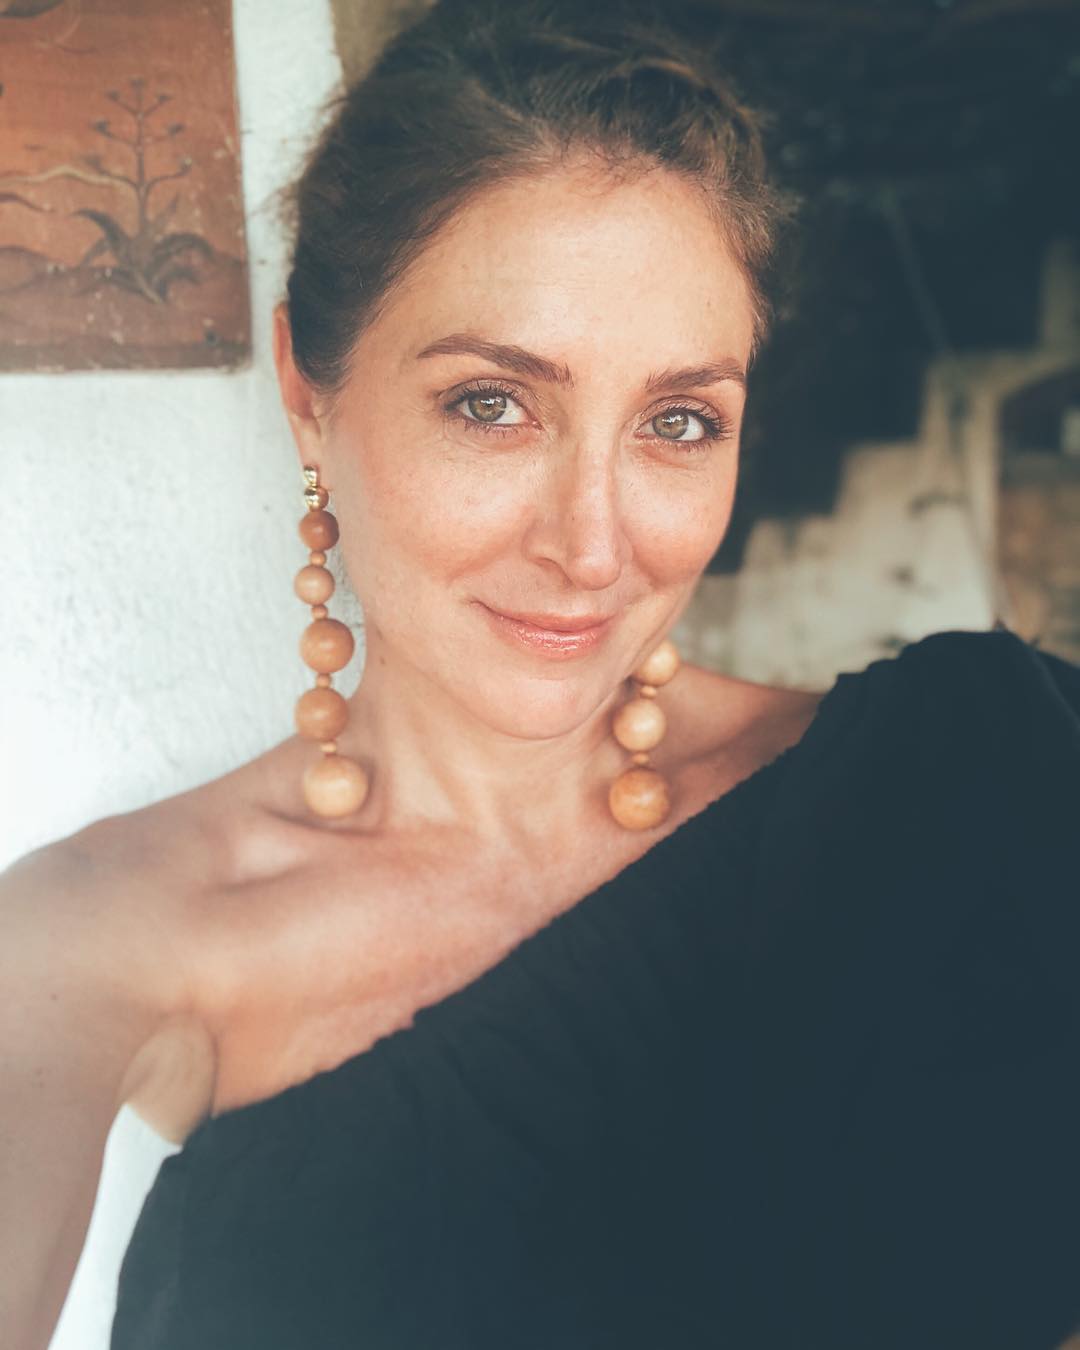 65+ Hottest Sasha Alexander Pictures Are Delight For Fans | Best Of Comic Books